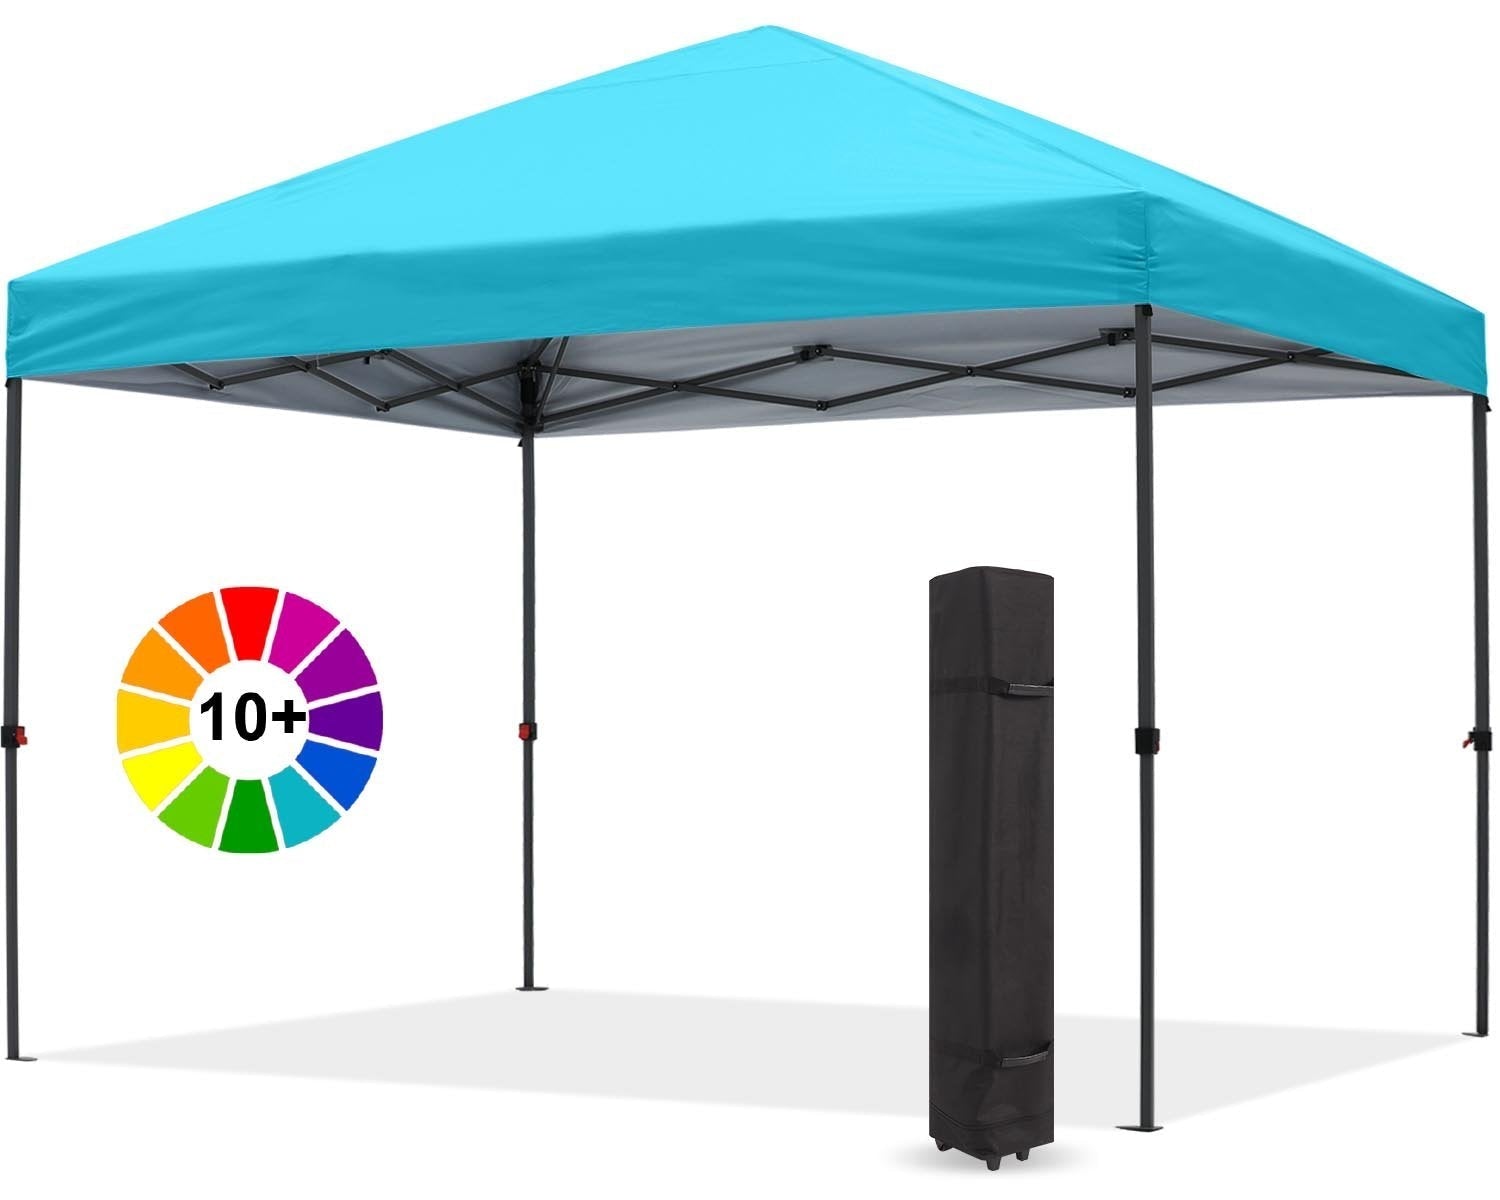 ABCCANOPY Durable Easy Pop up Canopy Tent - ABC-CANOPY